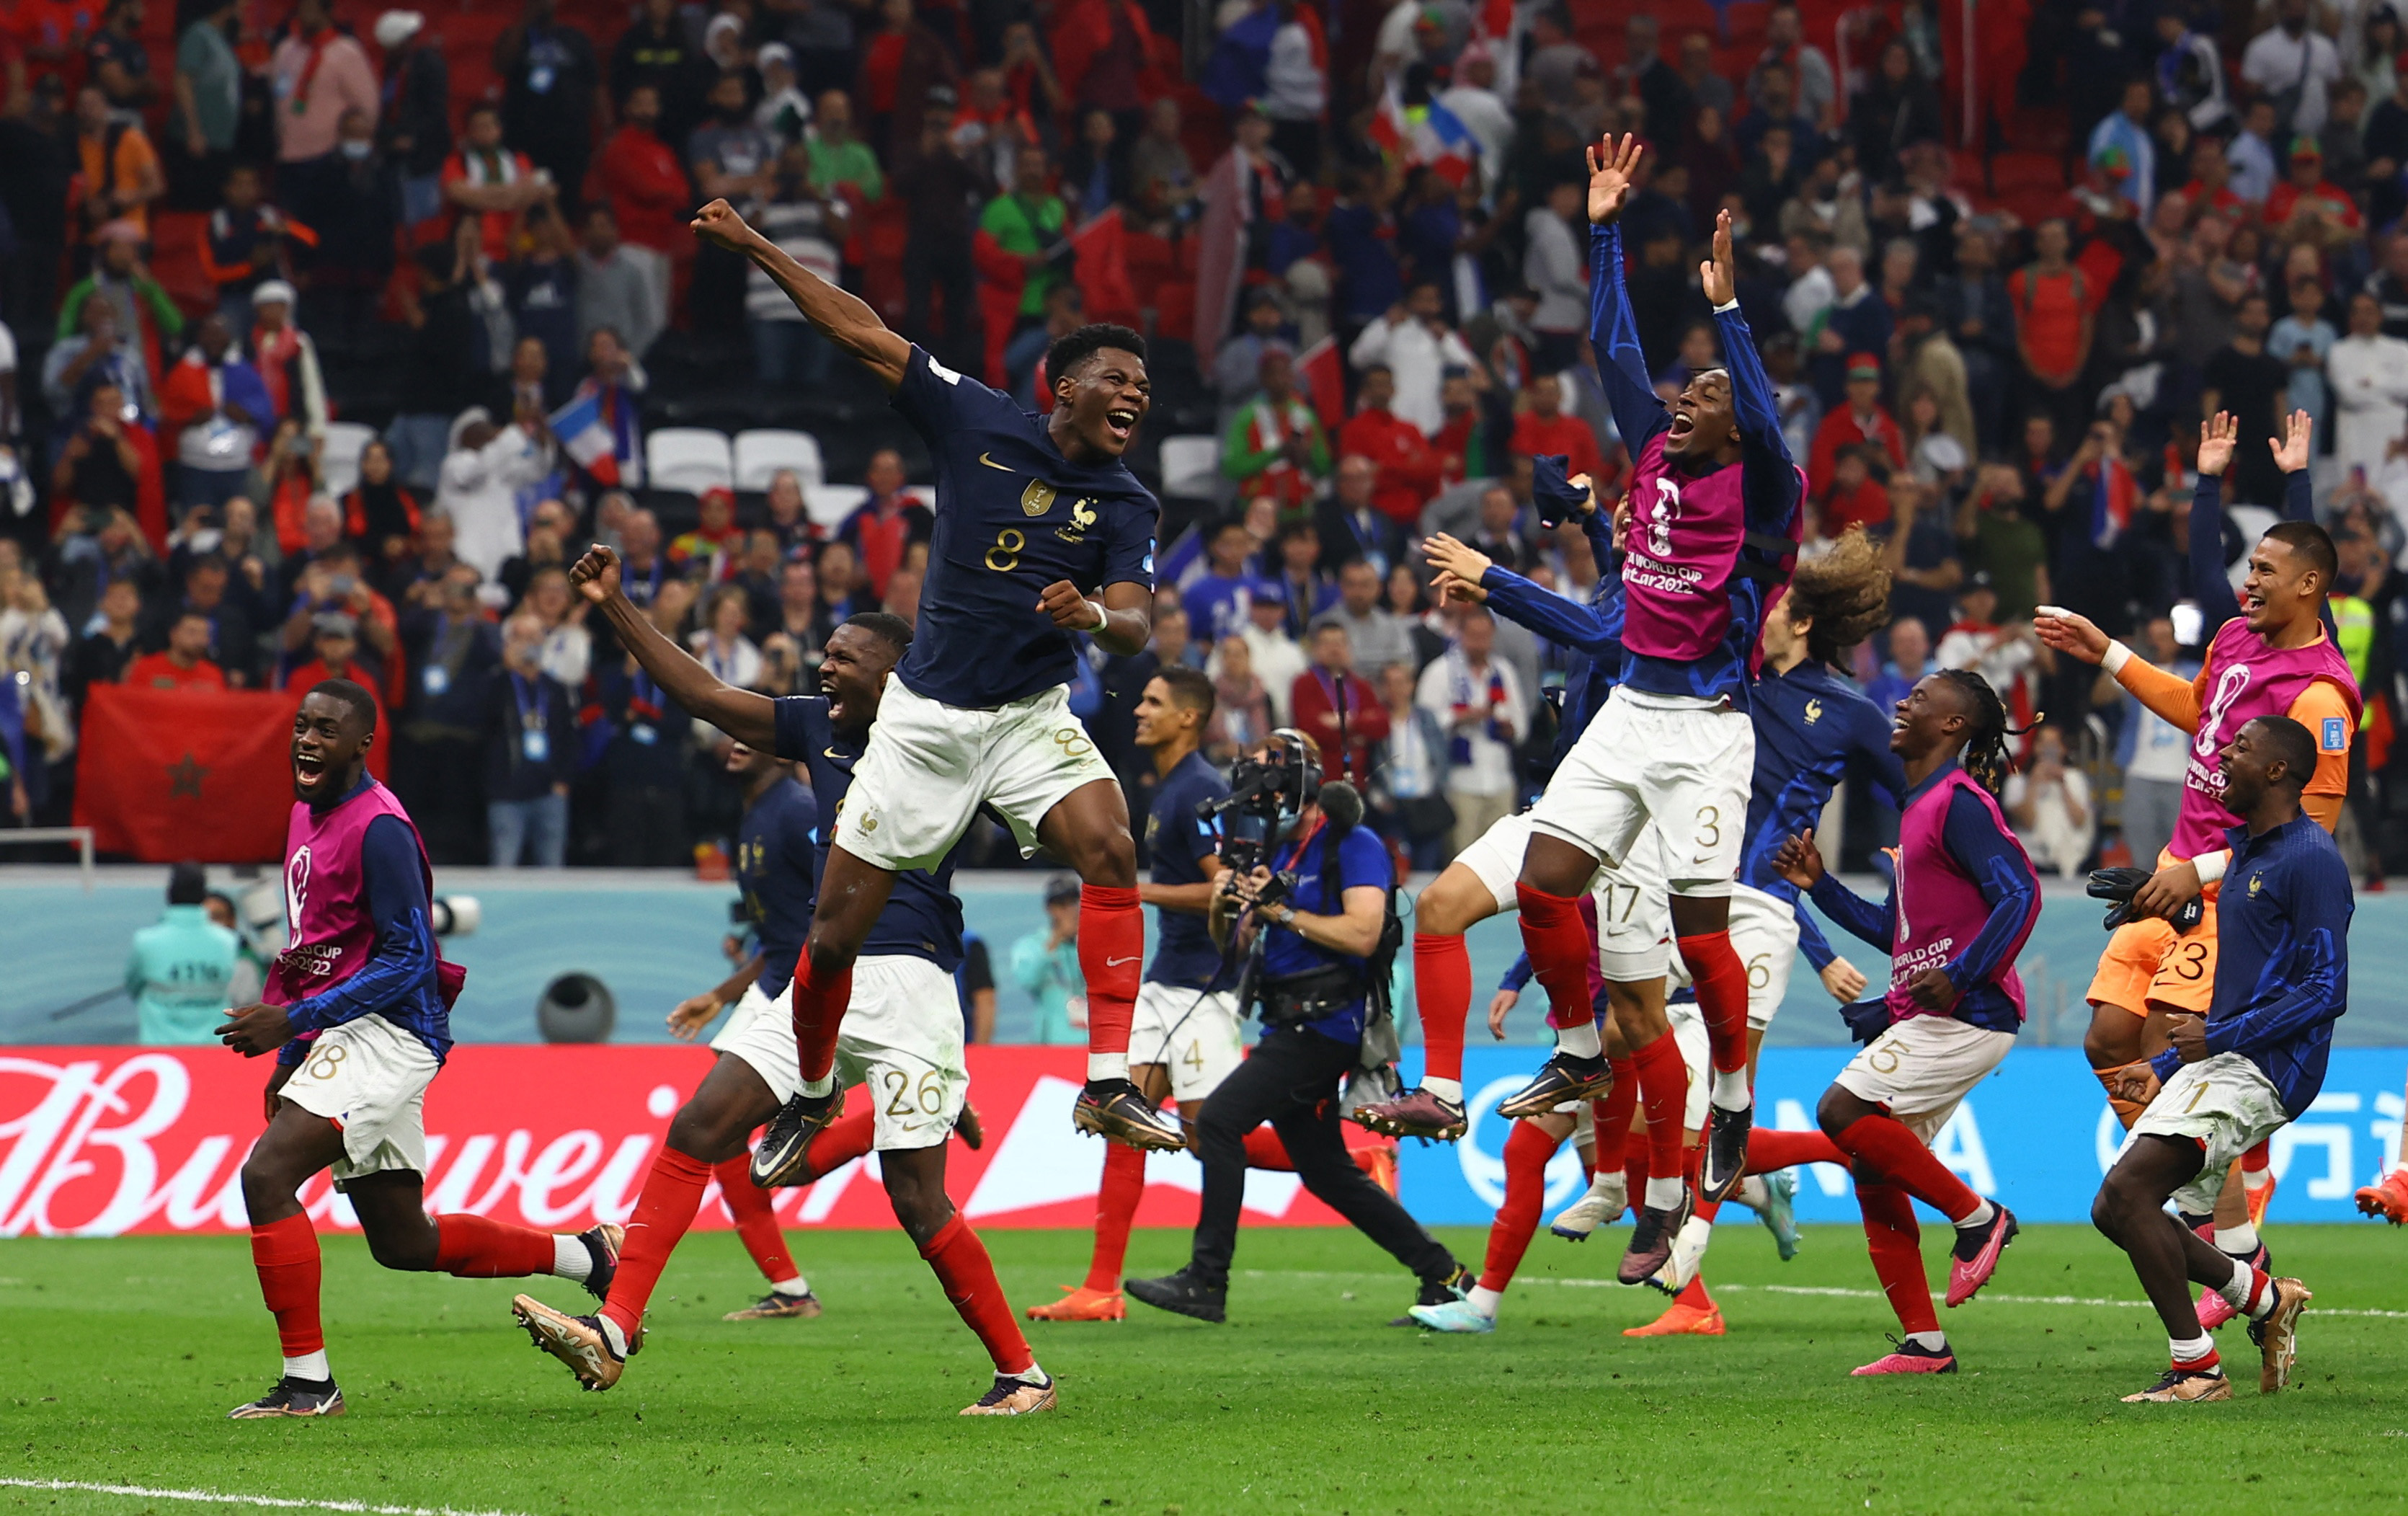 France's team celebrates after the match where they defeated Morocco 2-0 at Al-Bayt Stadium in Al Khor, Qatar on Wednesday.